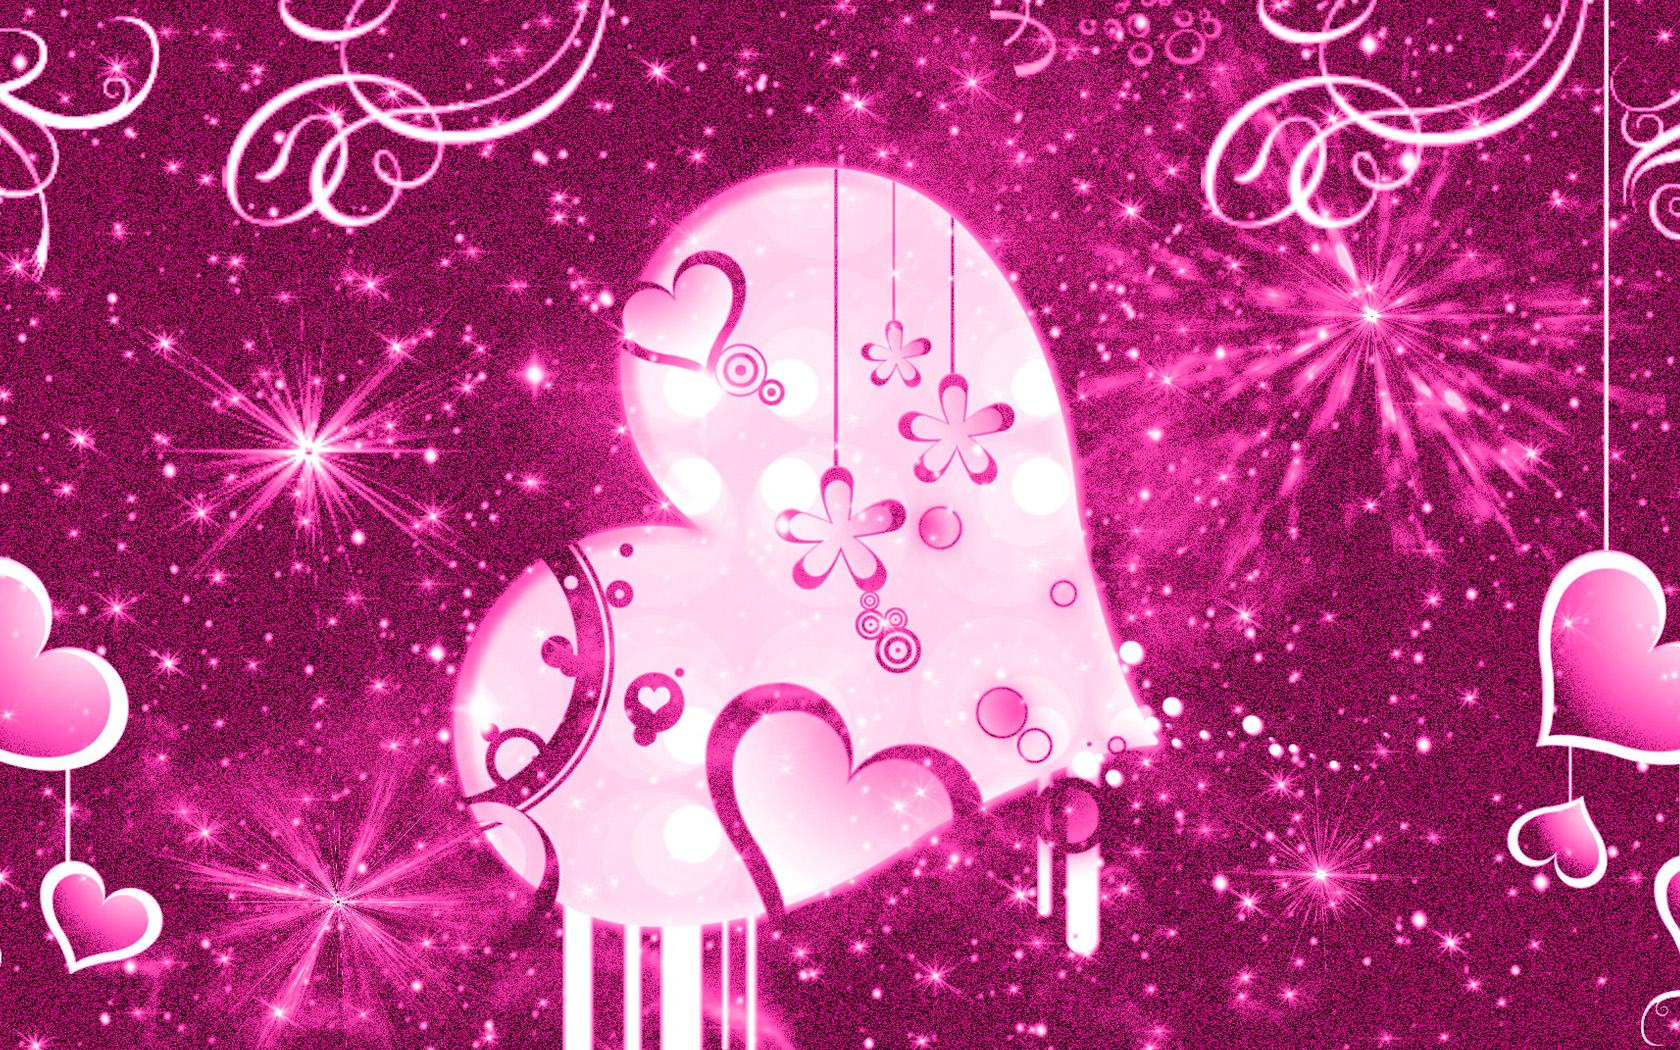 Wallpaper-Backgrounds-Girly-Wallpapers-Pink-Hd-Cute-Girly-Animated ...